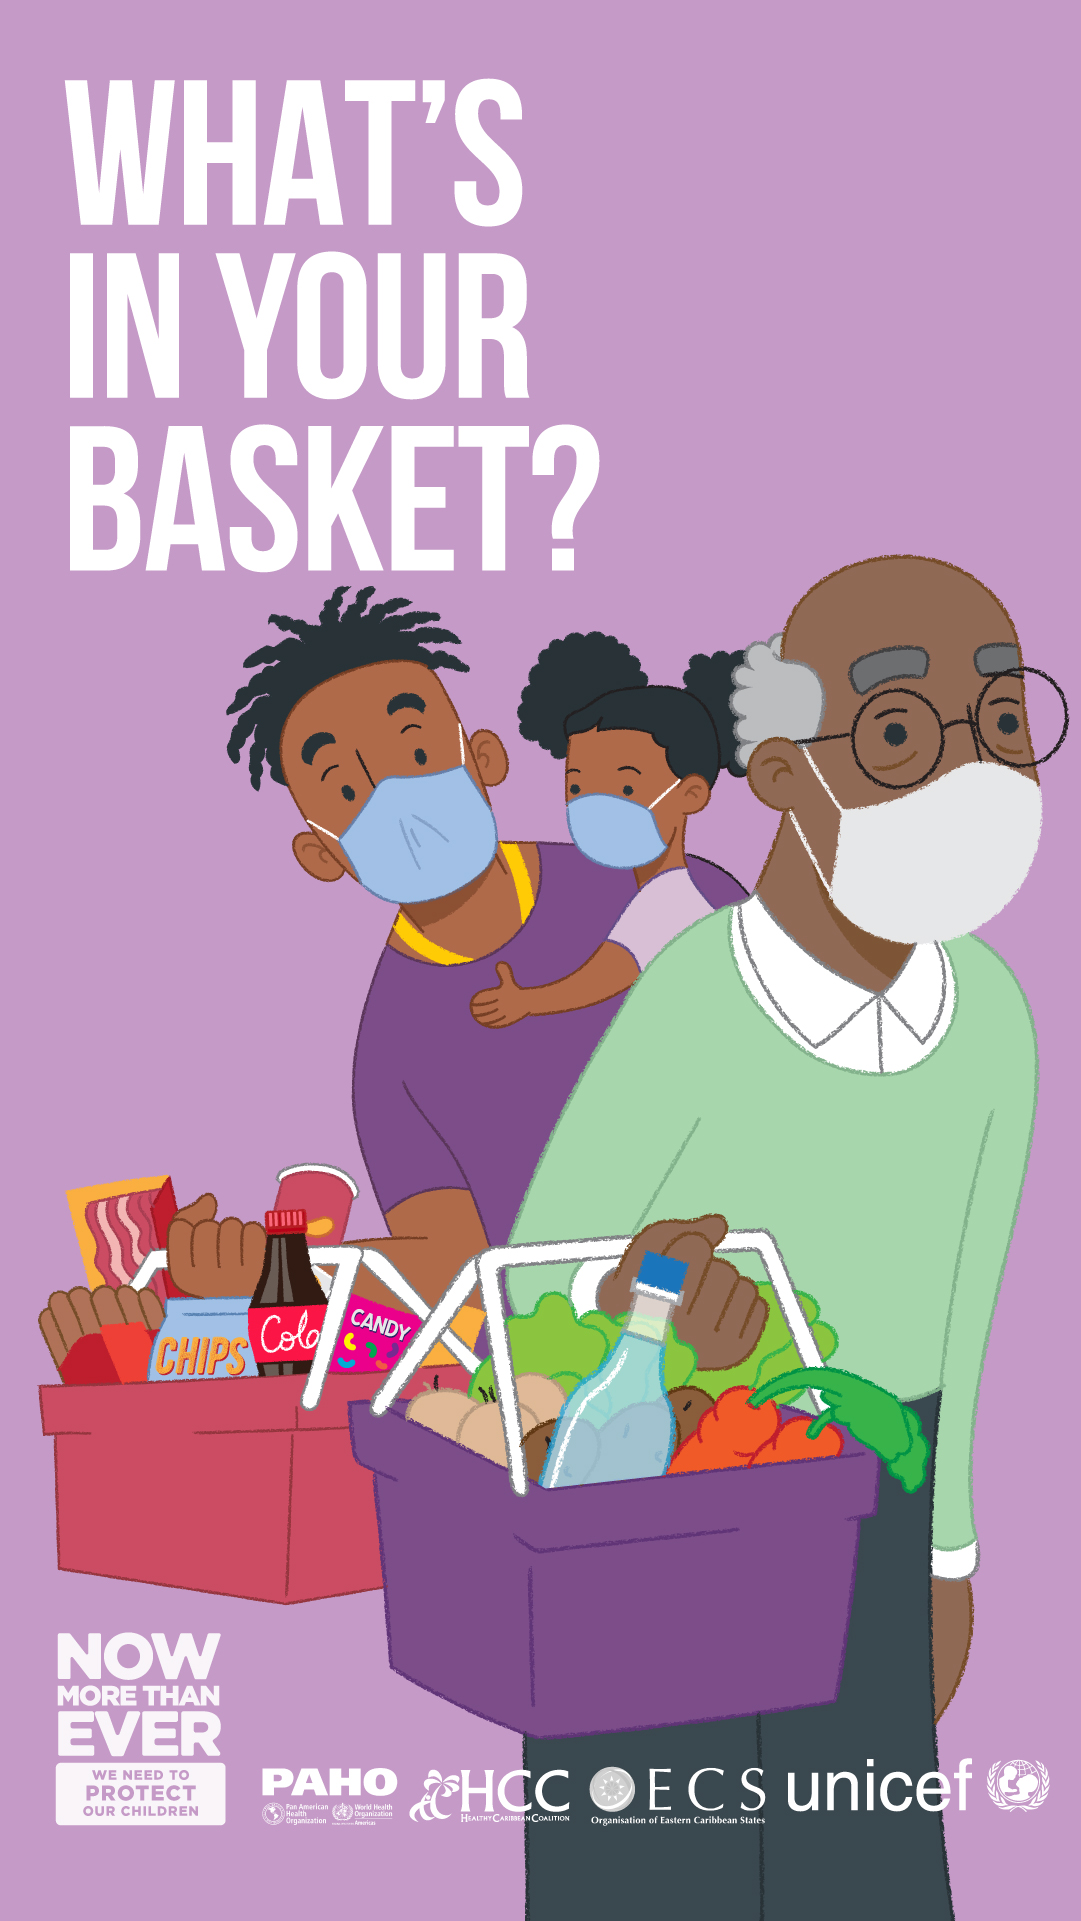 What's in your basket